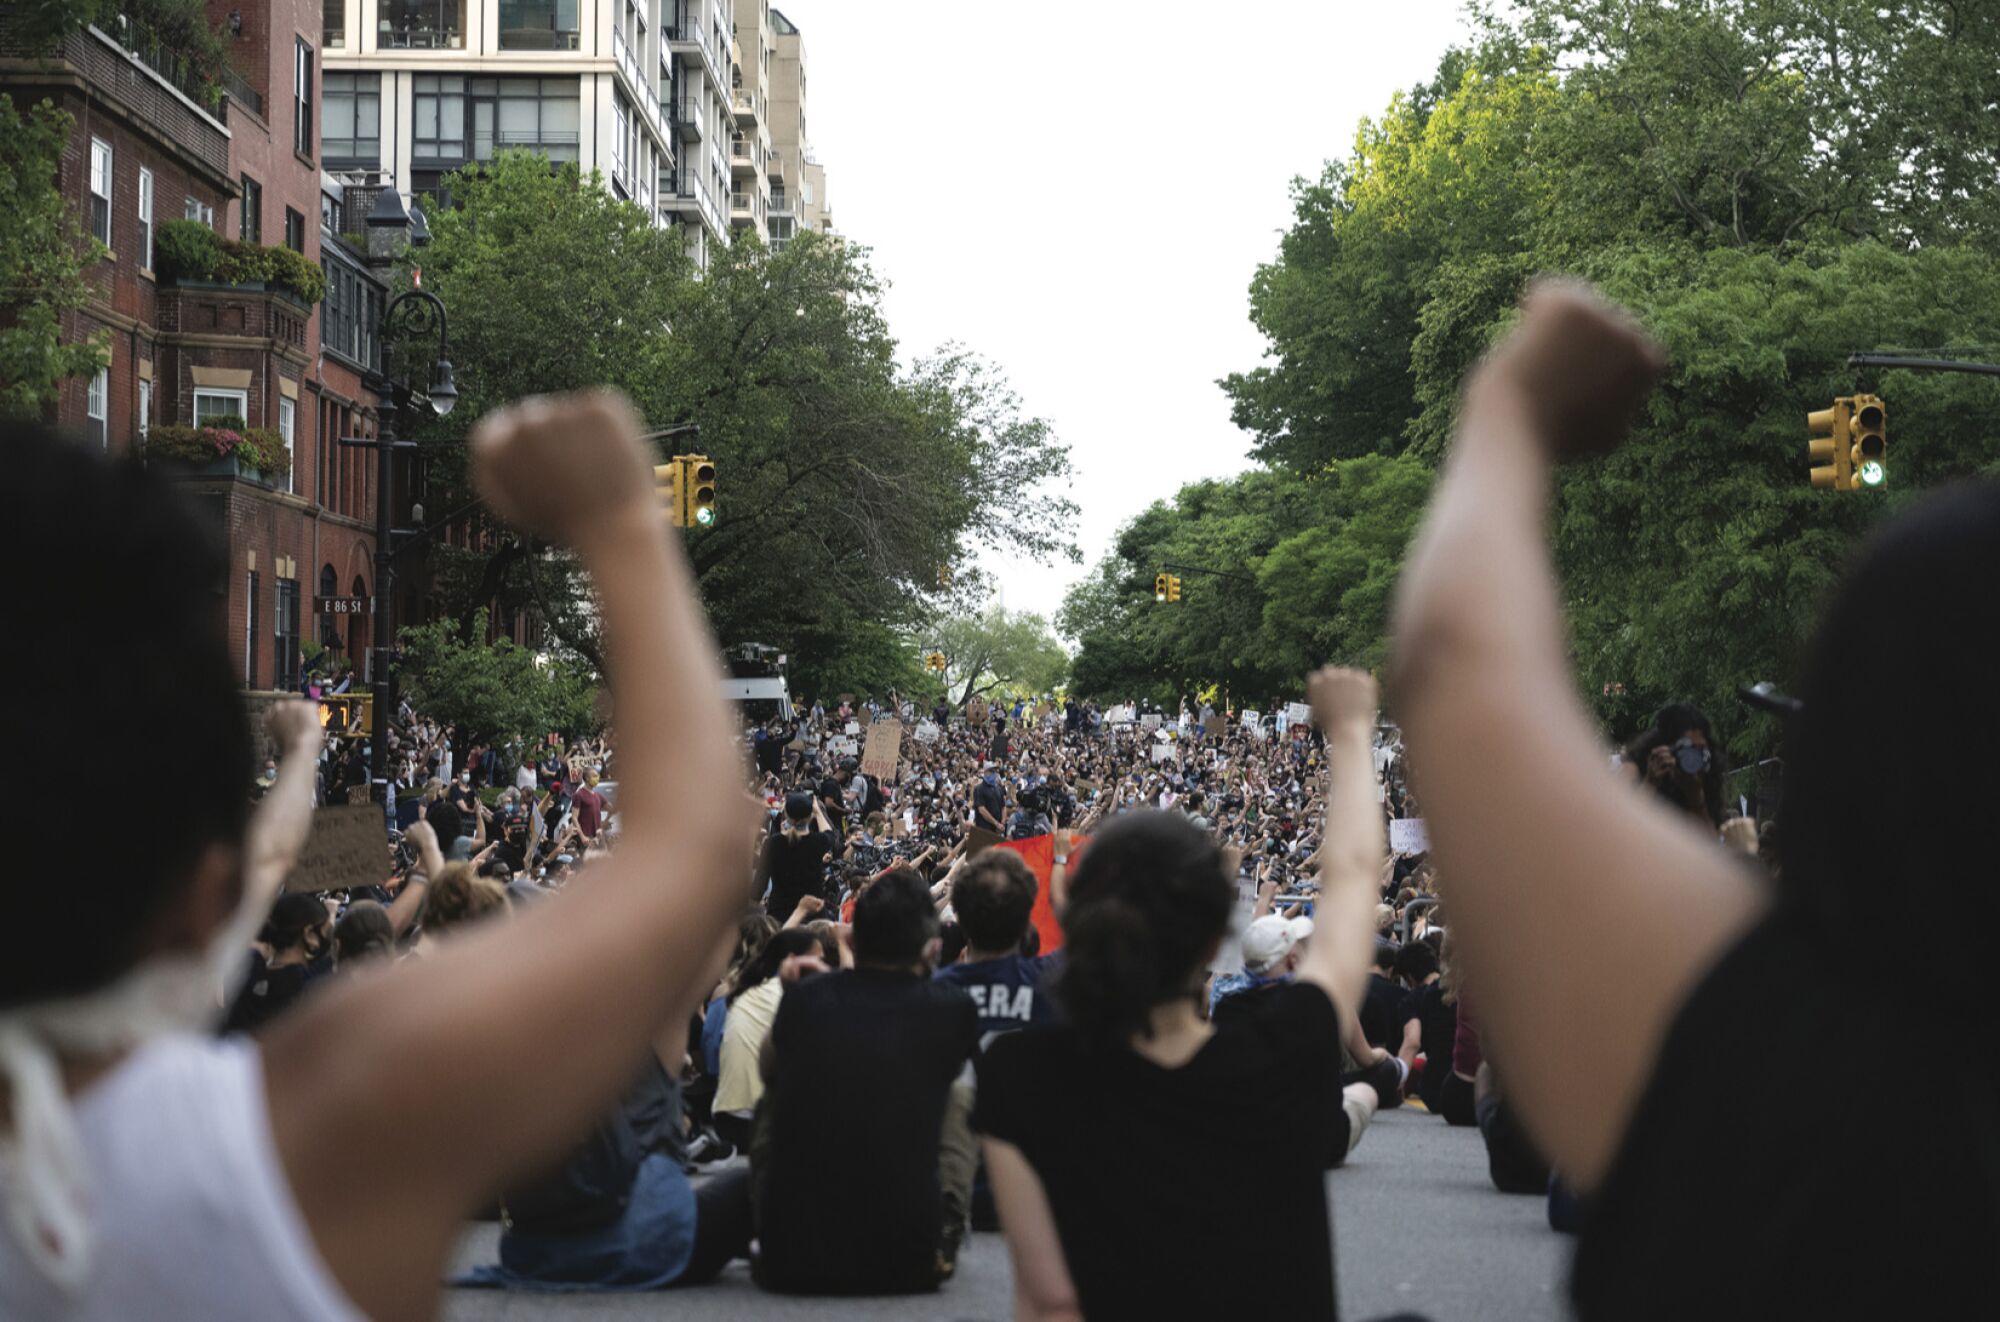 A photograph of a crowd of protesters from behind.